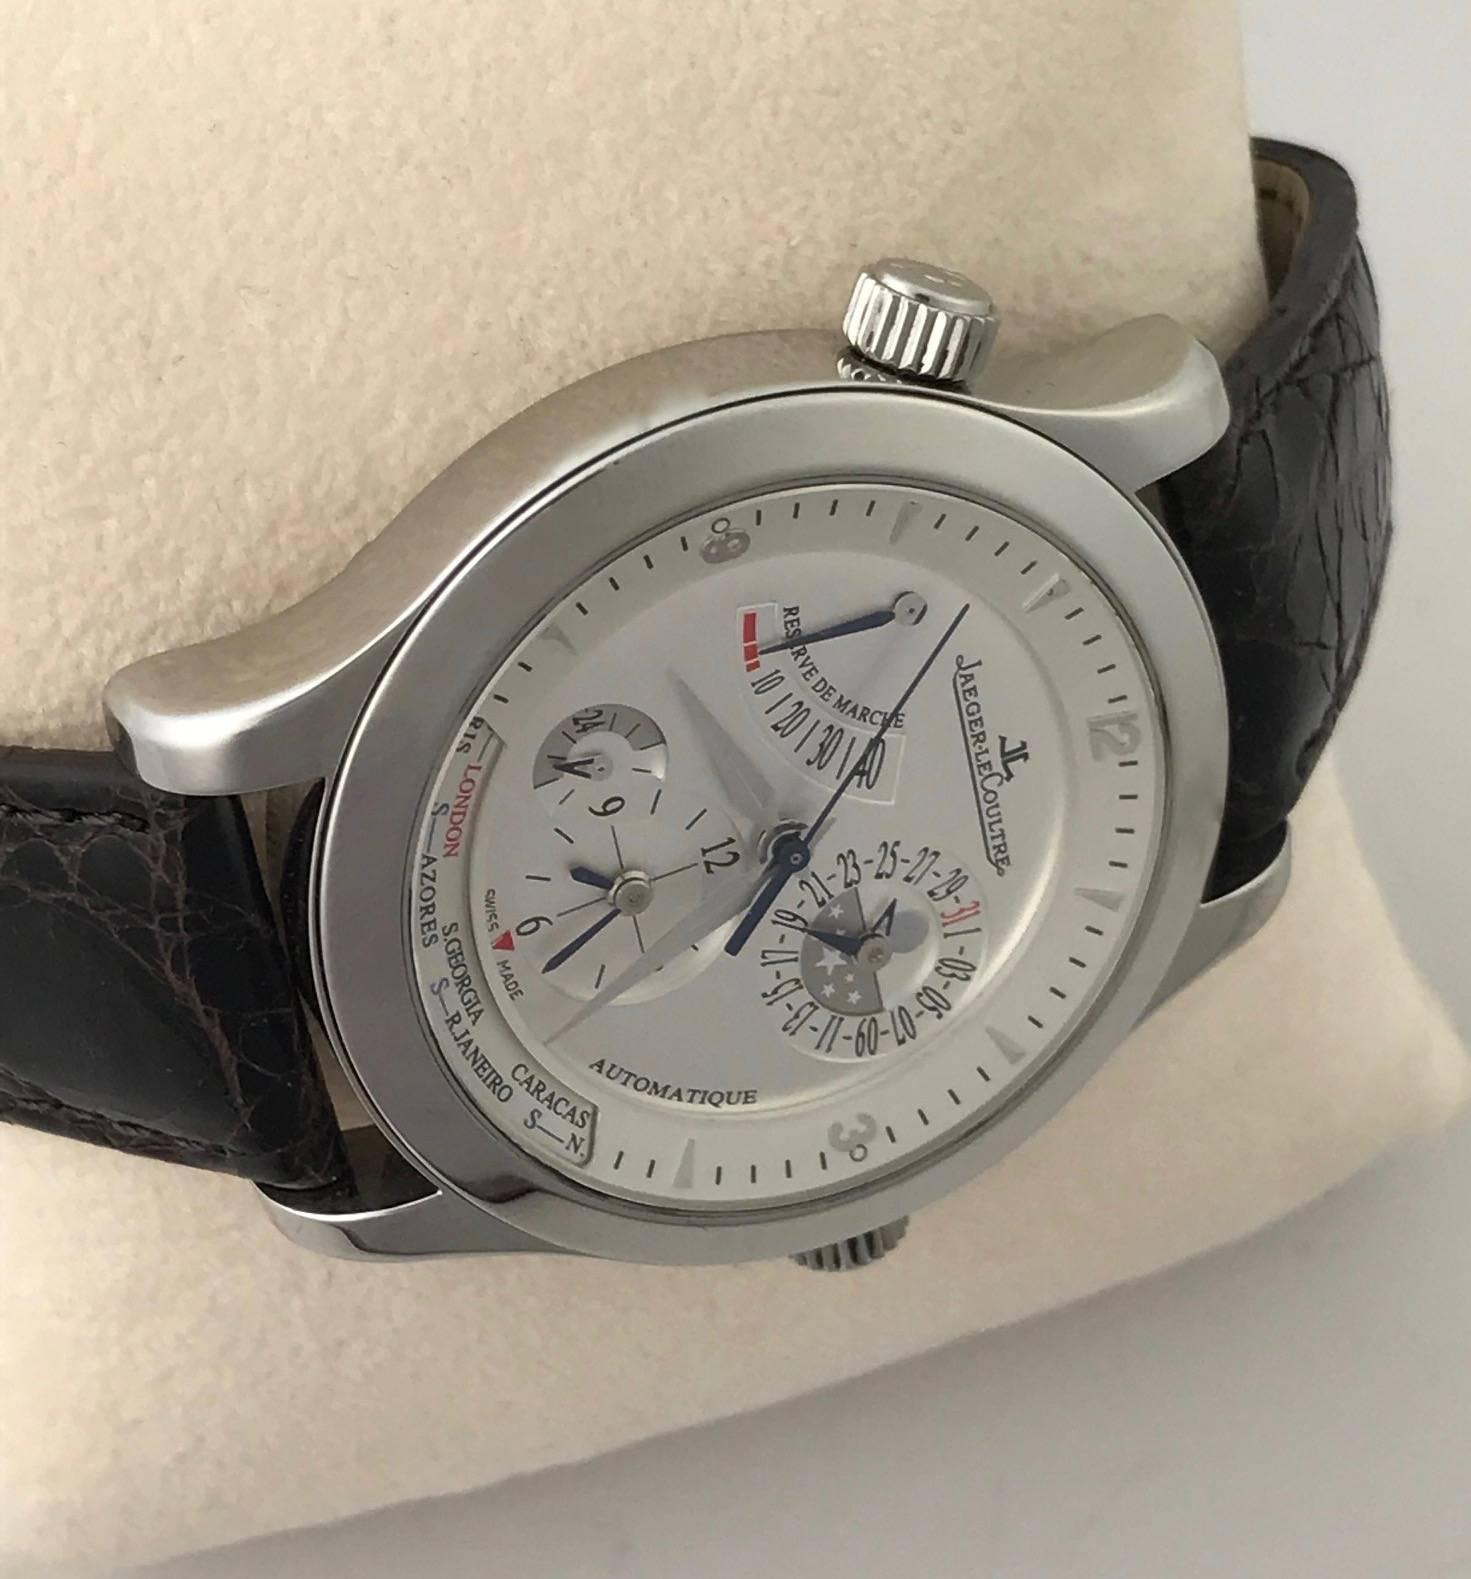 Contemporary Jaeger LeCoultre stainless Steel Master Geographique Automatic Wristwatch